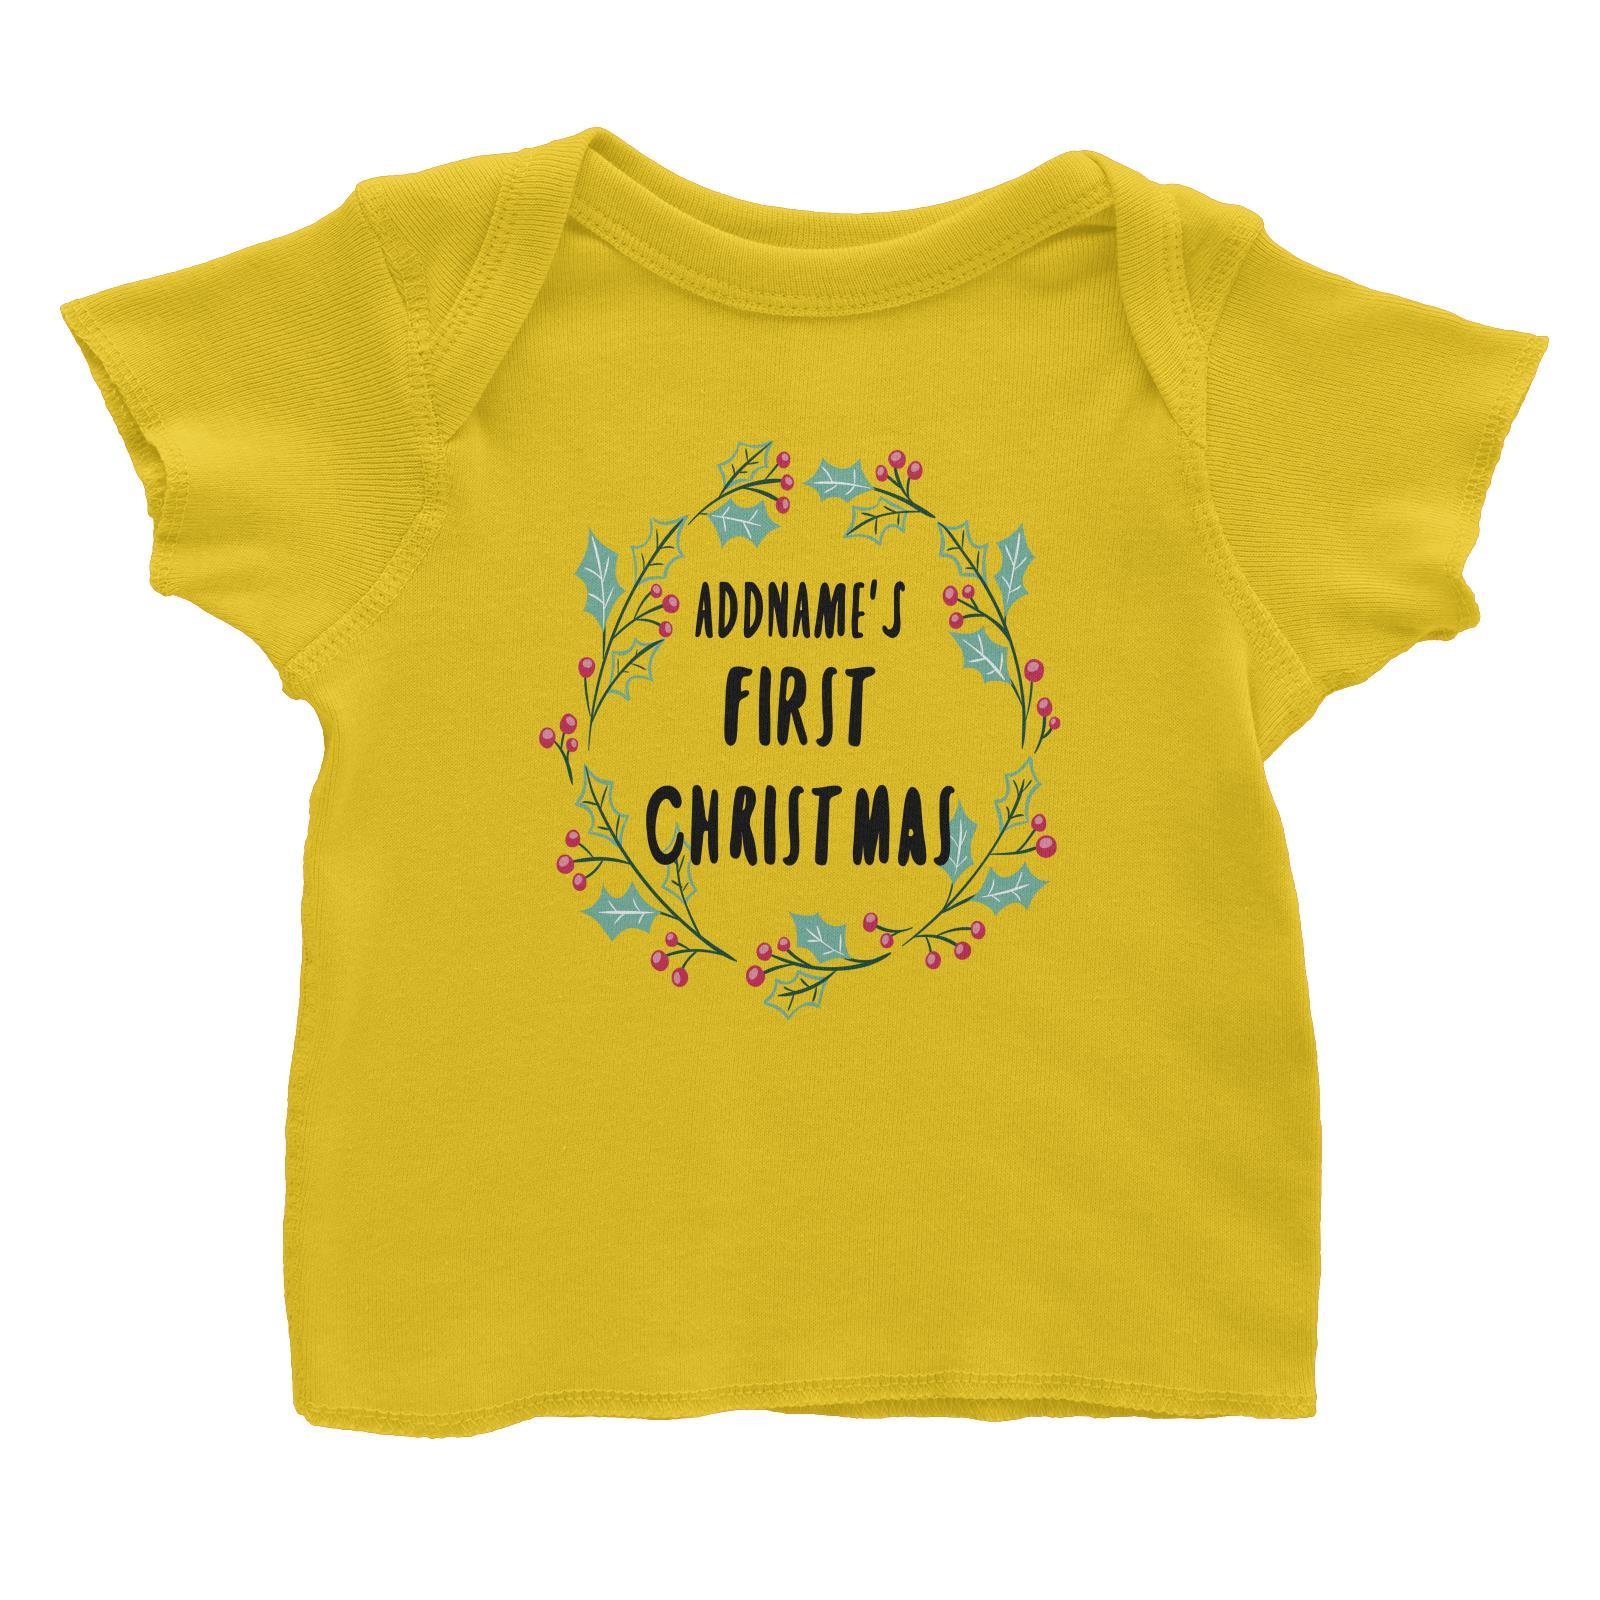 Holly Wreath Addname's First Christmas Baby T-Shirt  Personalizable Designs